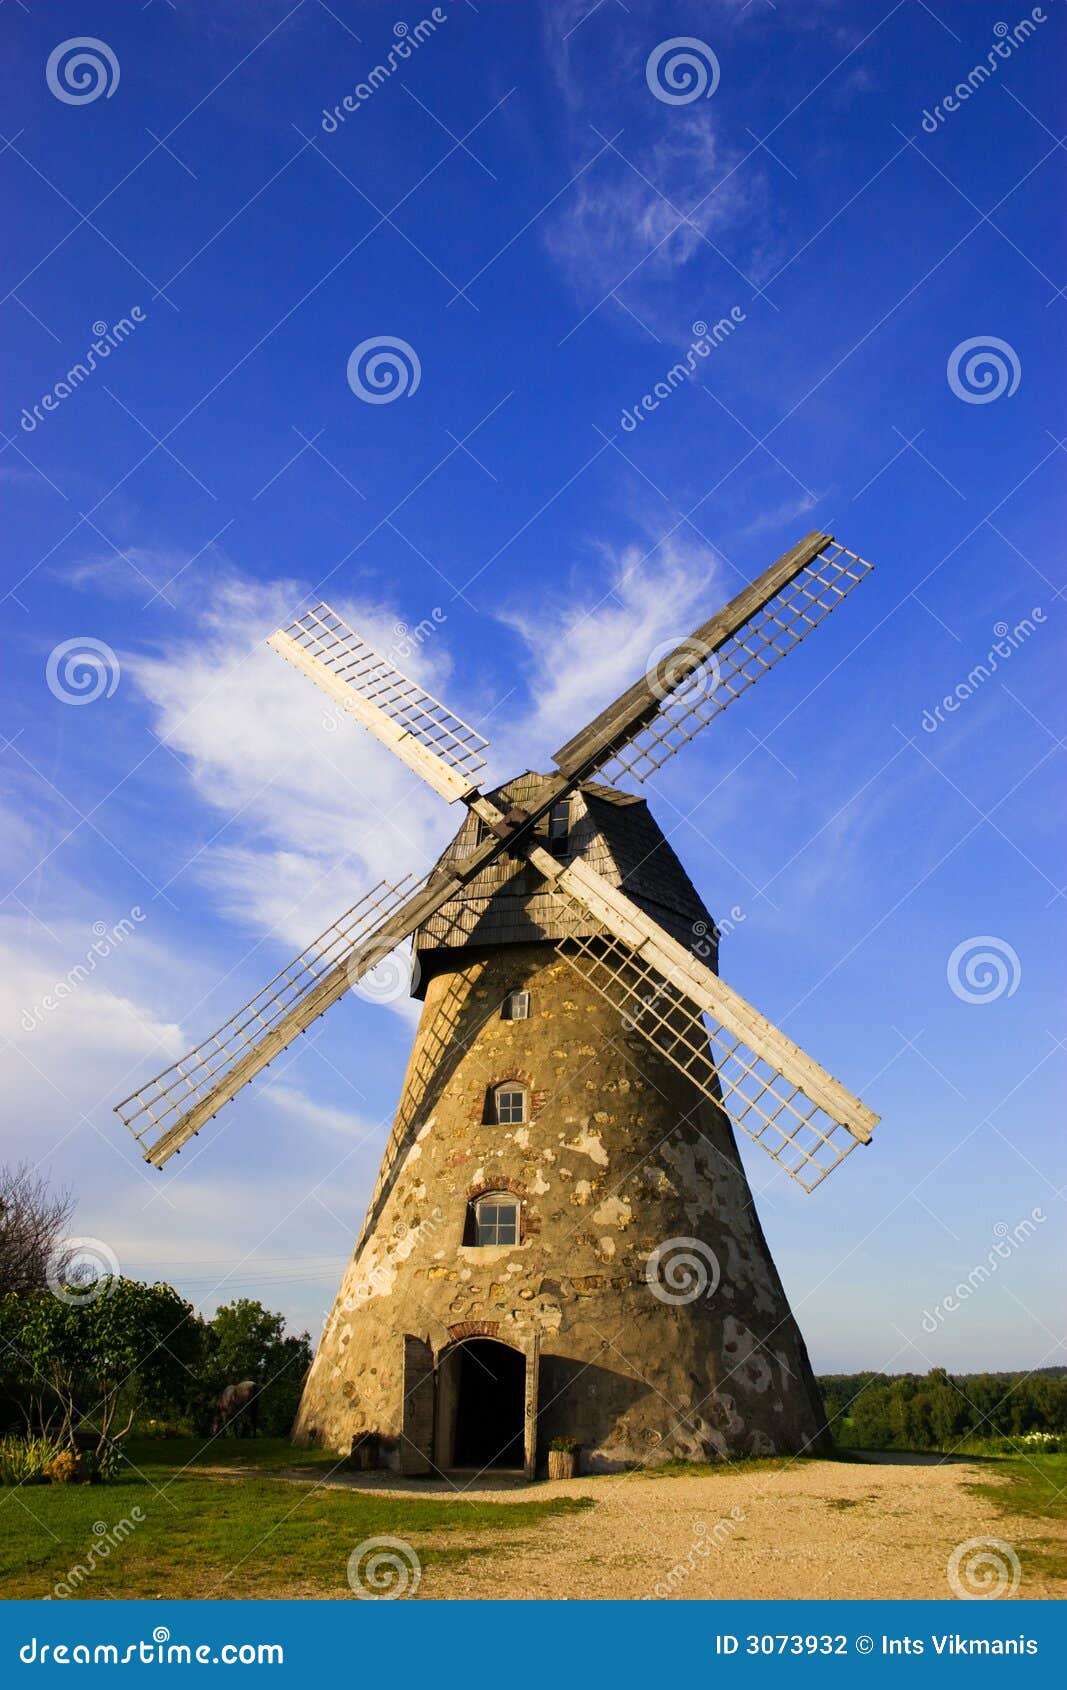 Traditional Old dutch windmill in Latvia against blue sky with white 